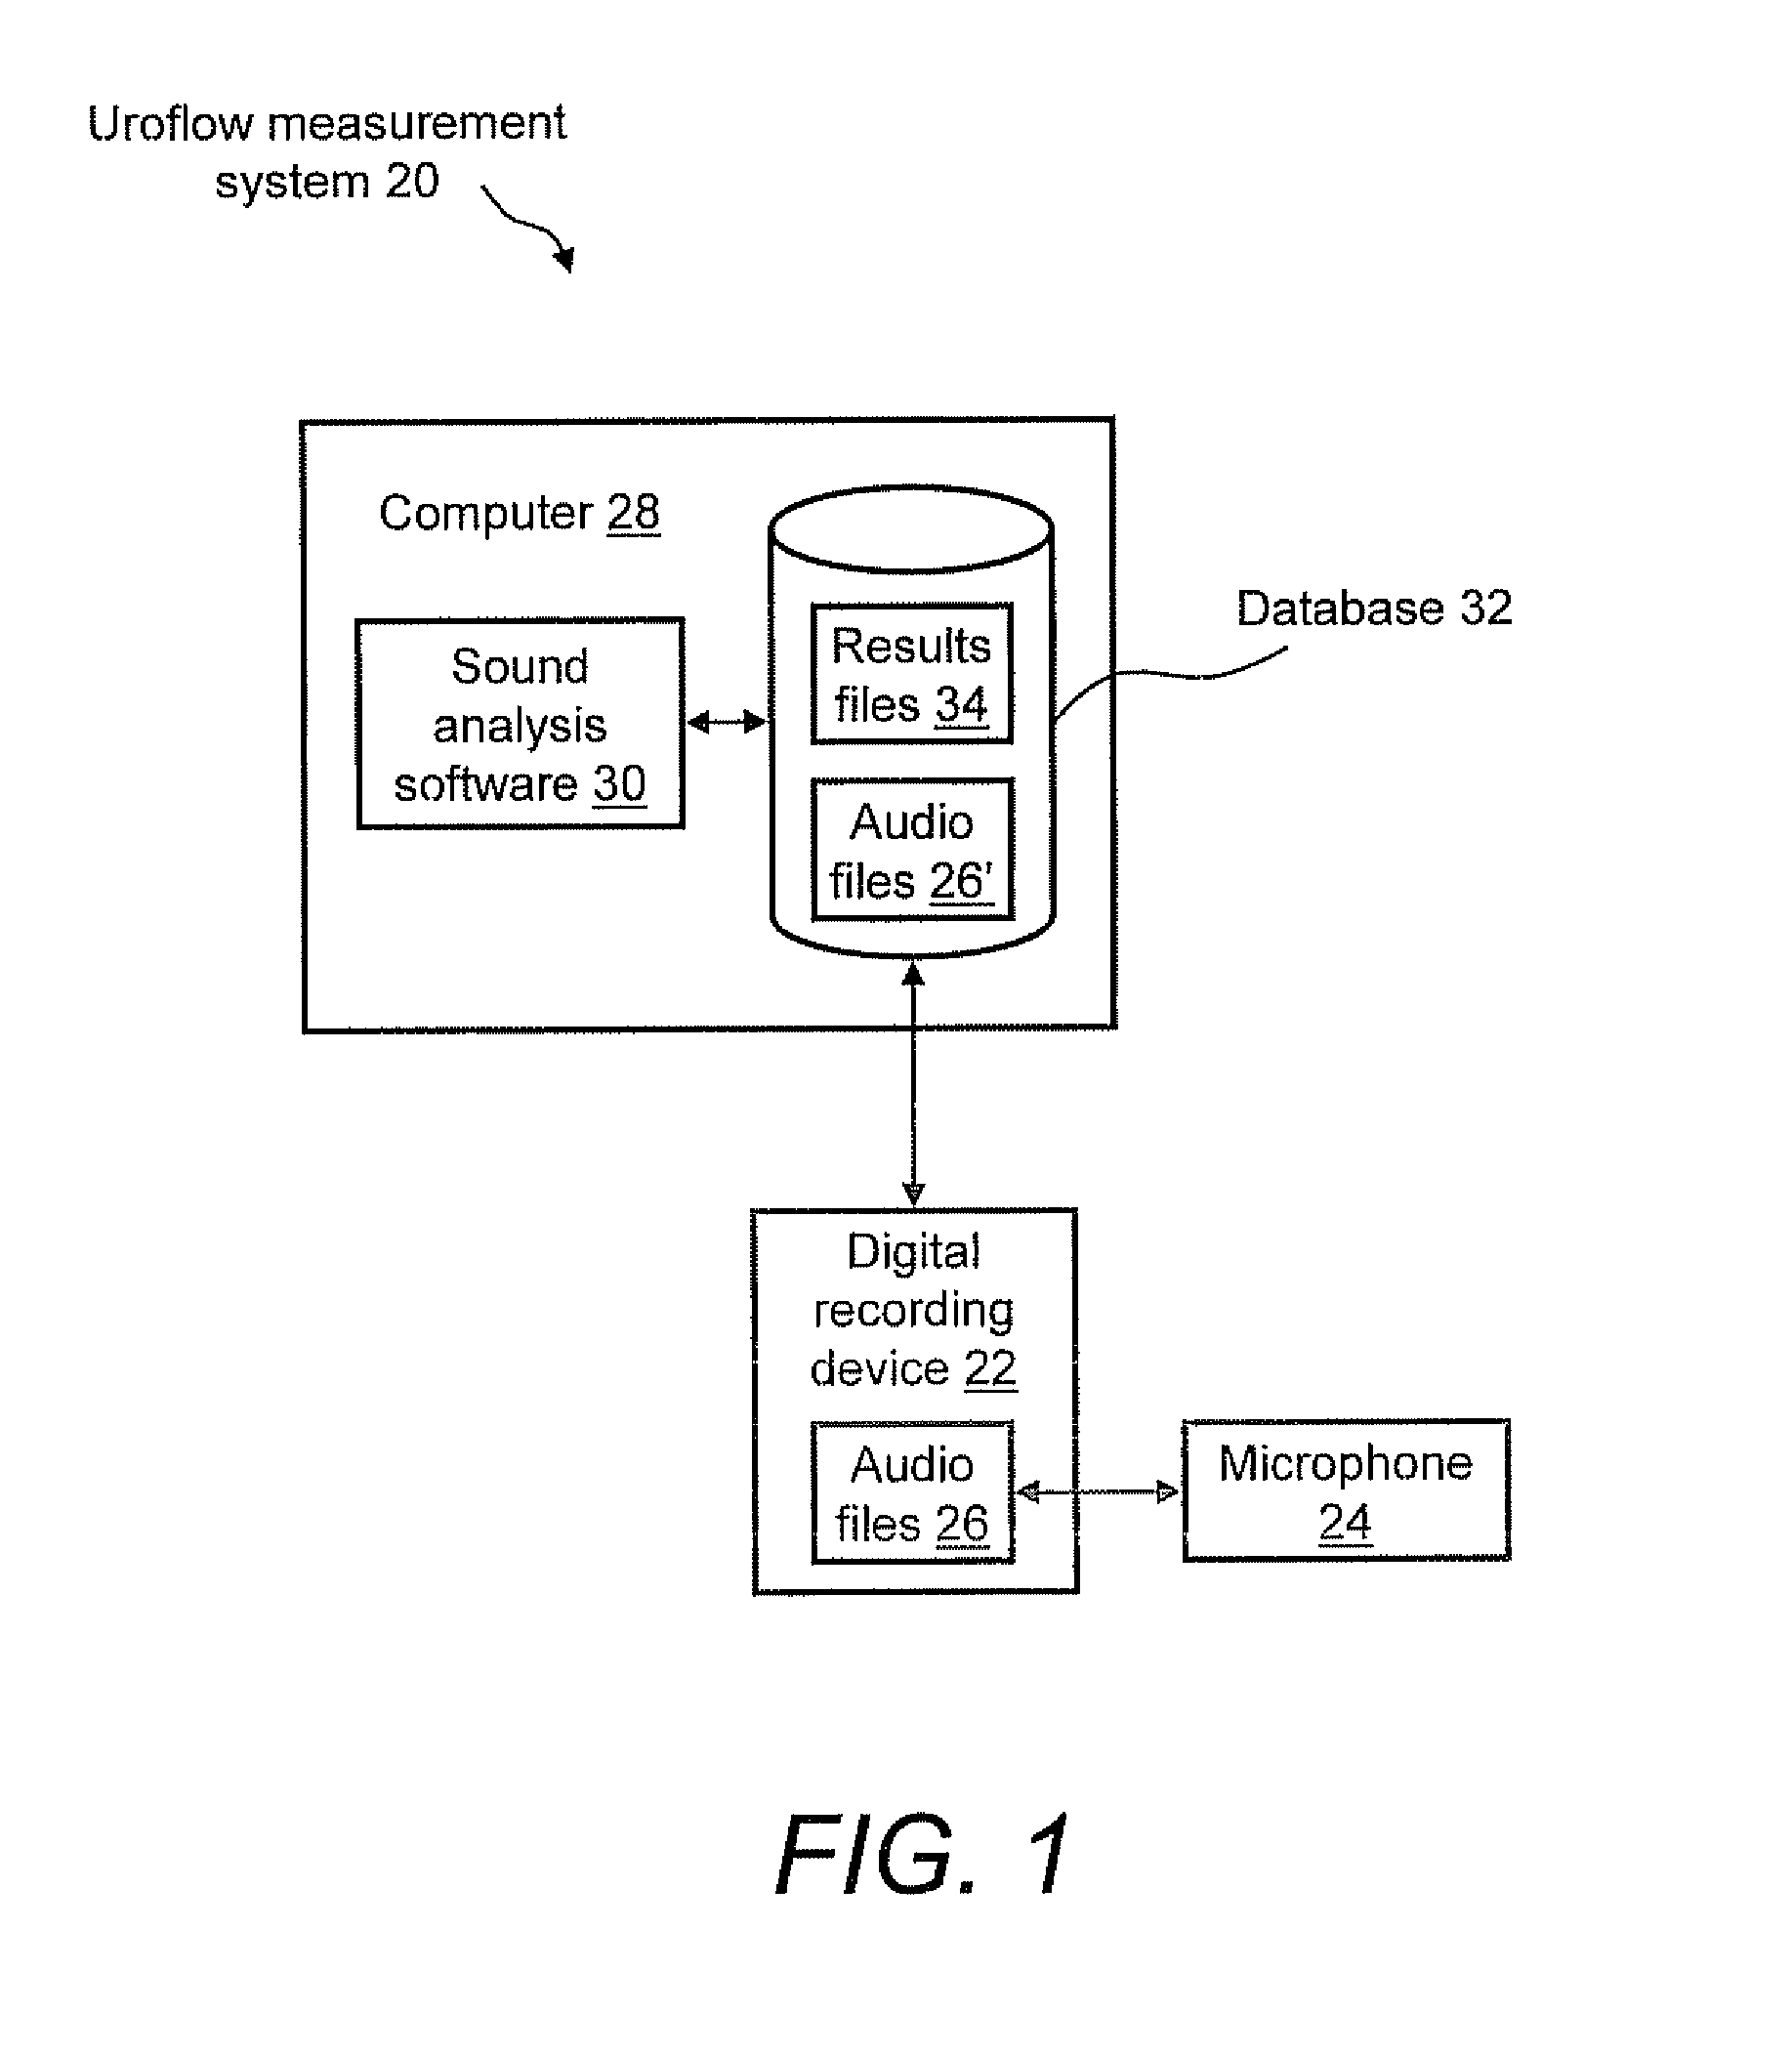 Systems for and methods of assessing urinary flow rate via sound analysis